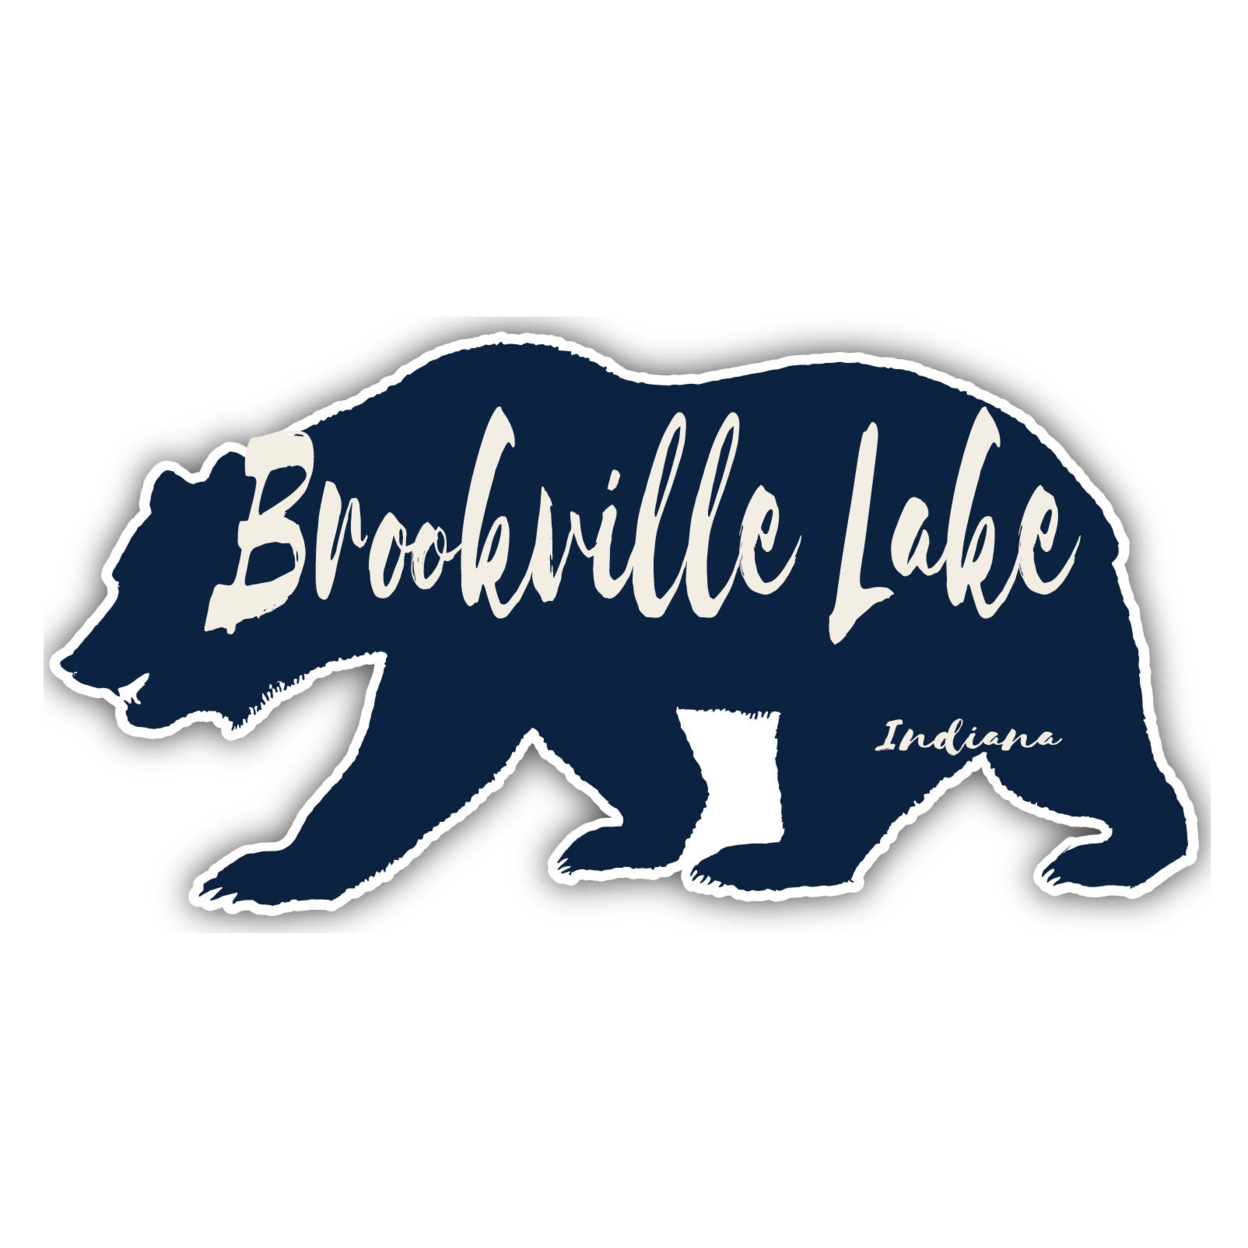 Brookville Lake Indiana Souvenir Decorative Stickers (Choose Theme And Size) - 4-Pack, 8-Inch, Great Outdoors